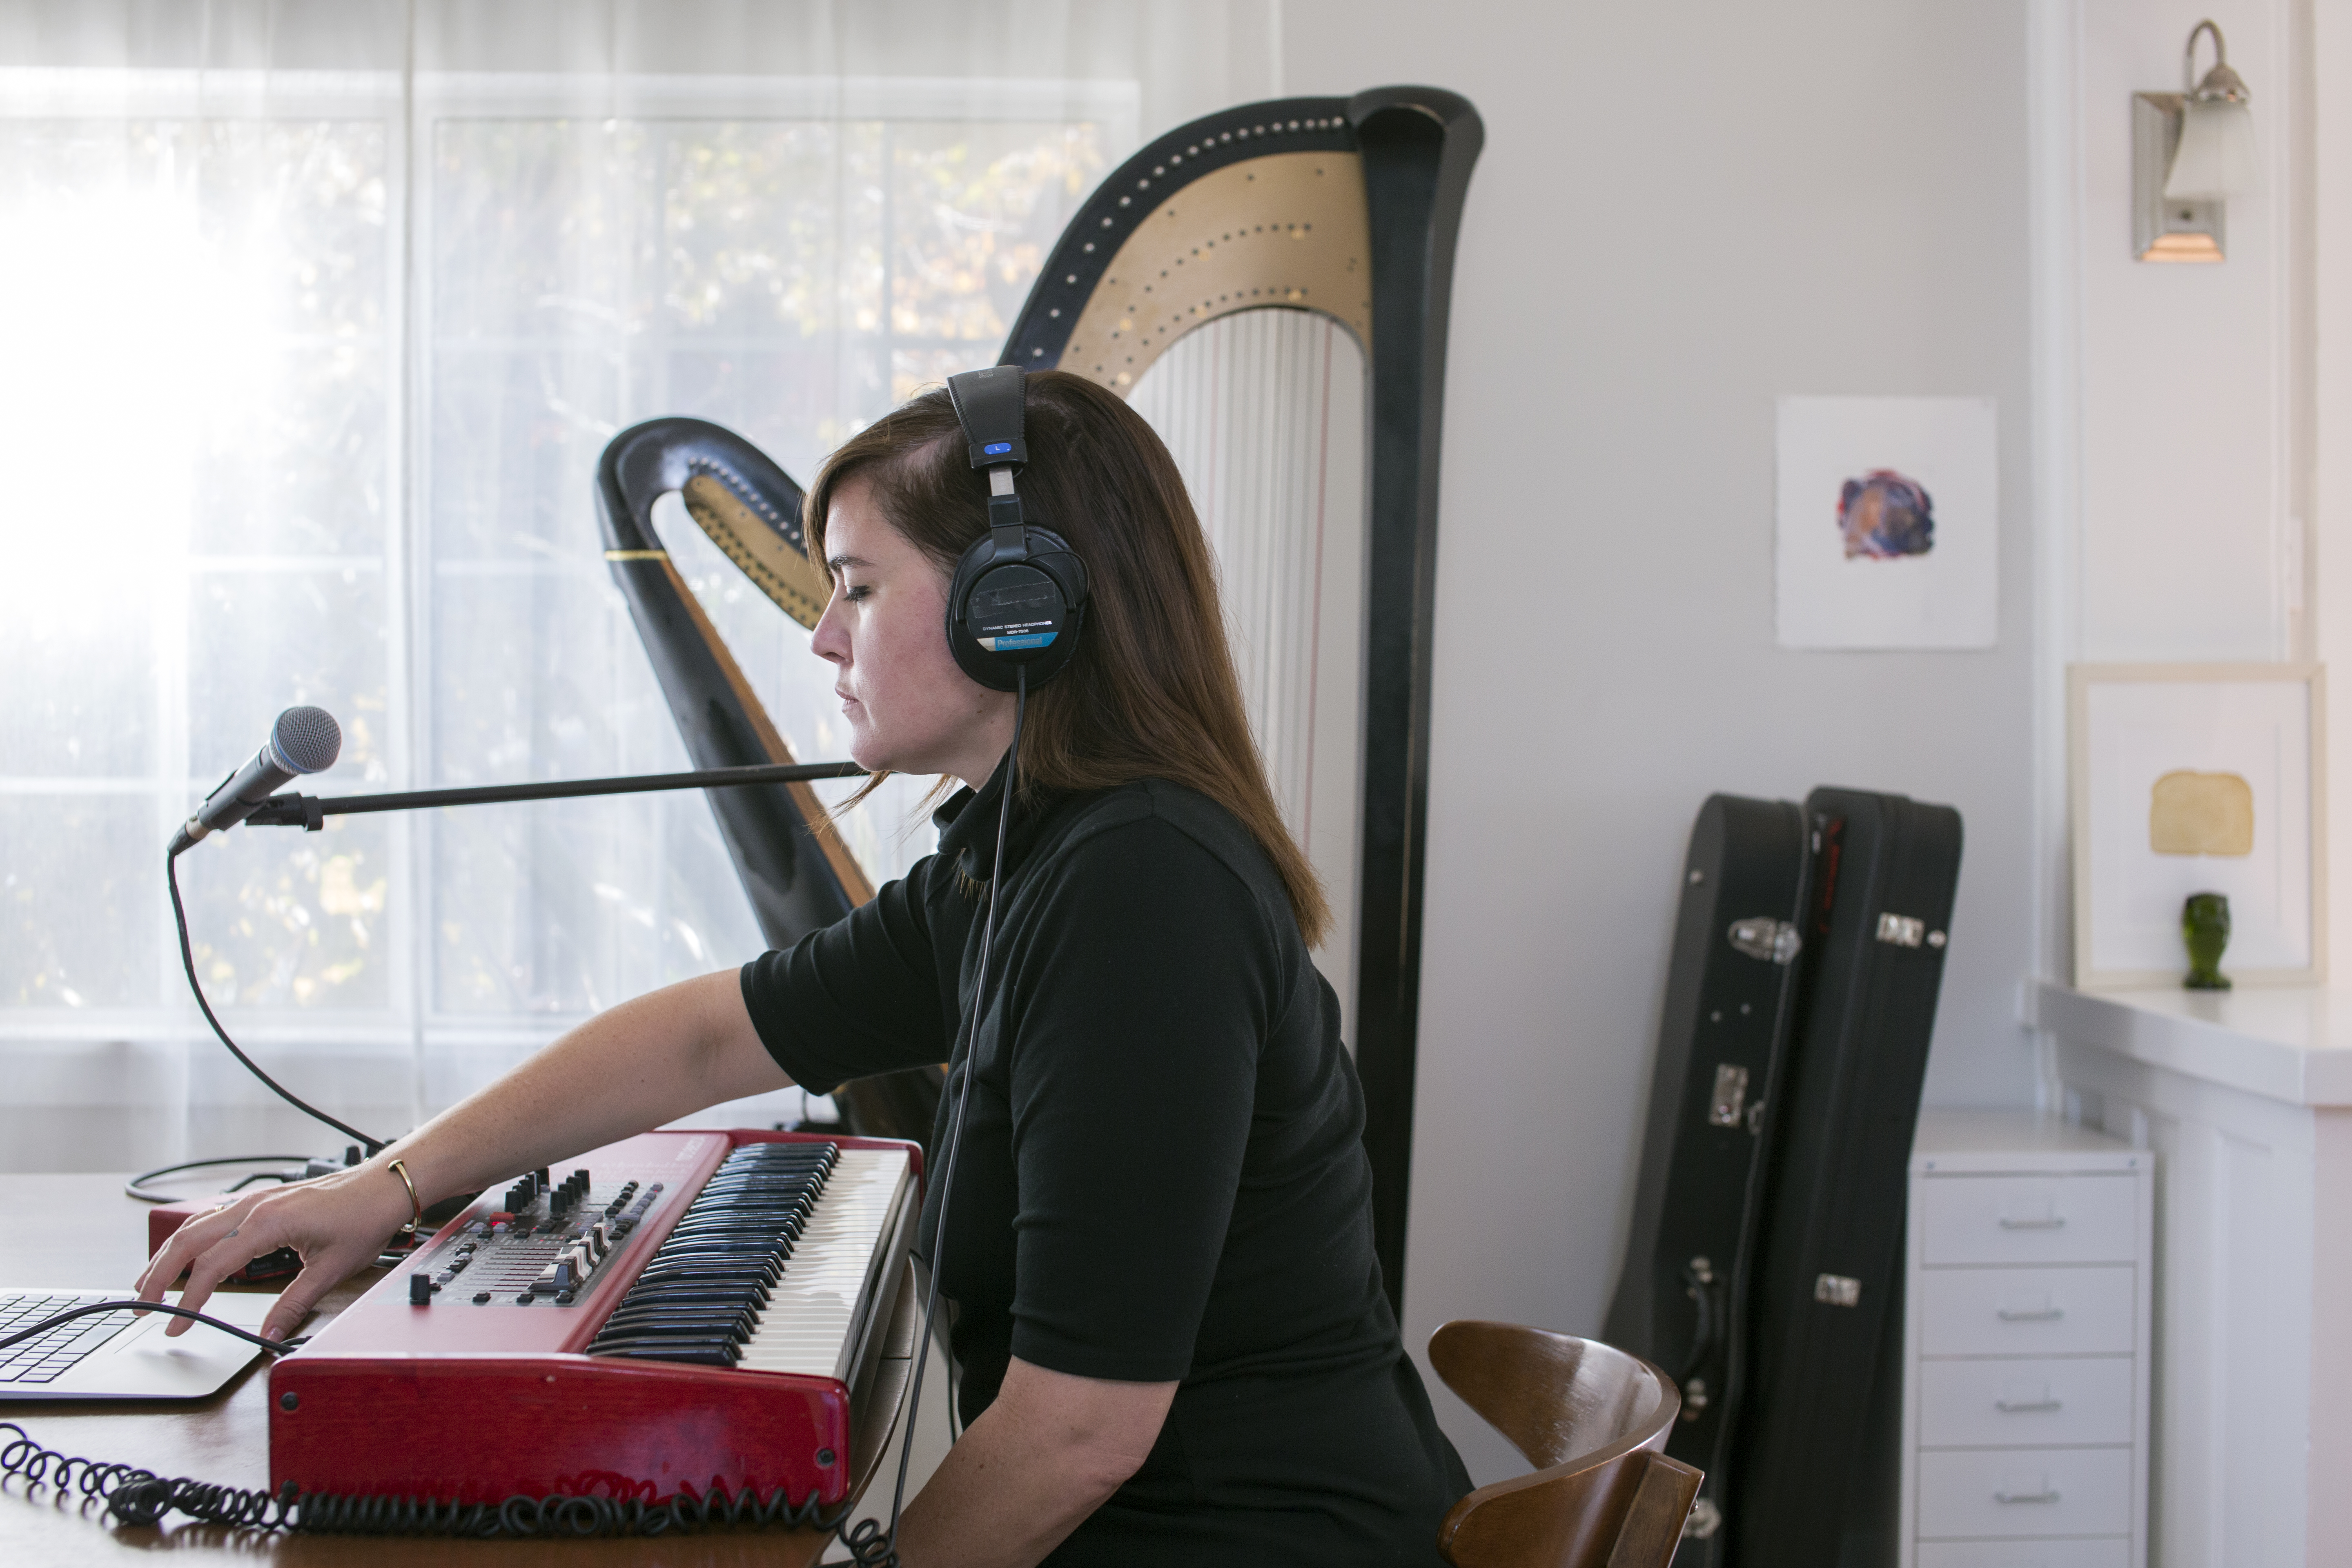 Woman wearing headphones interact with her laptop while she plays music with a harp in the background